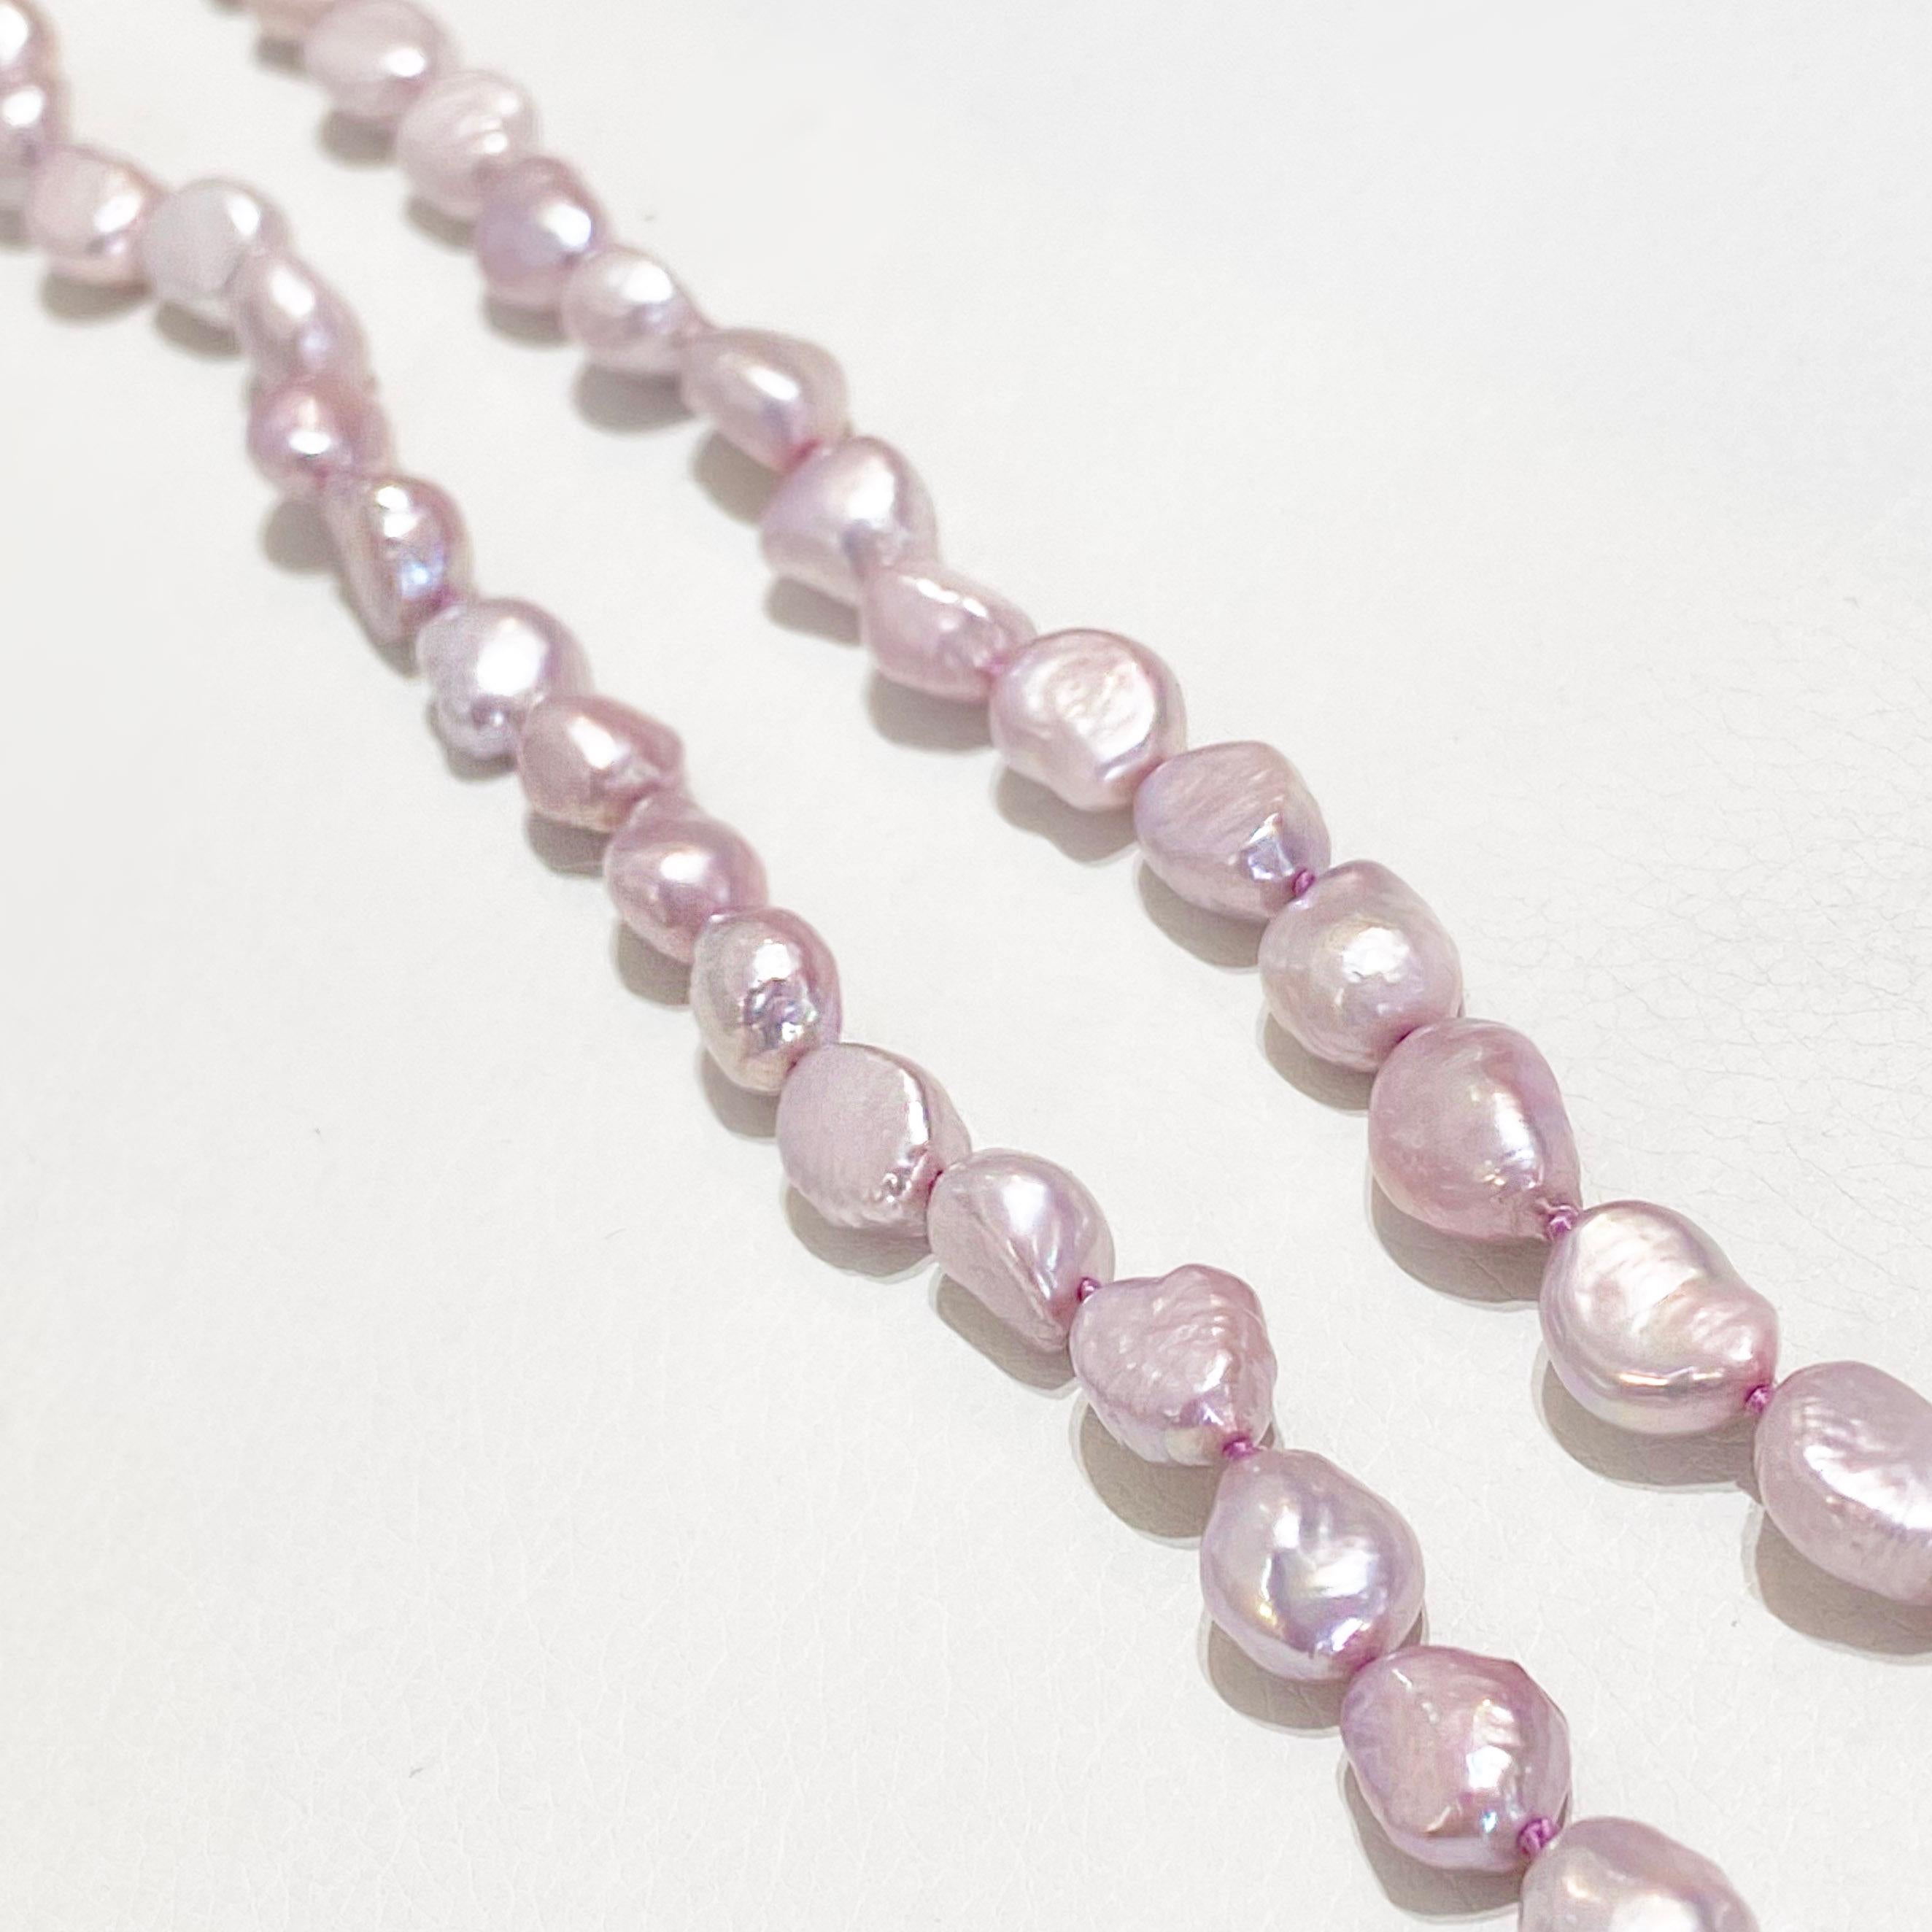 The details for this beautiful necklace are listed below:
Metal Quality: Sterling Silver
Pearl Type: Beaded Pearls
Chain Length: 35.5 inches
Clasp Type: Lobster
Gemstone: Cultured Pearls
Gemstone Number:72
Gemstone Shape: Off Round, Unusual
Gemstone